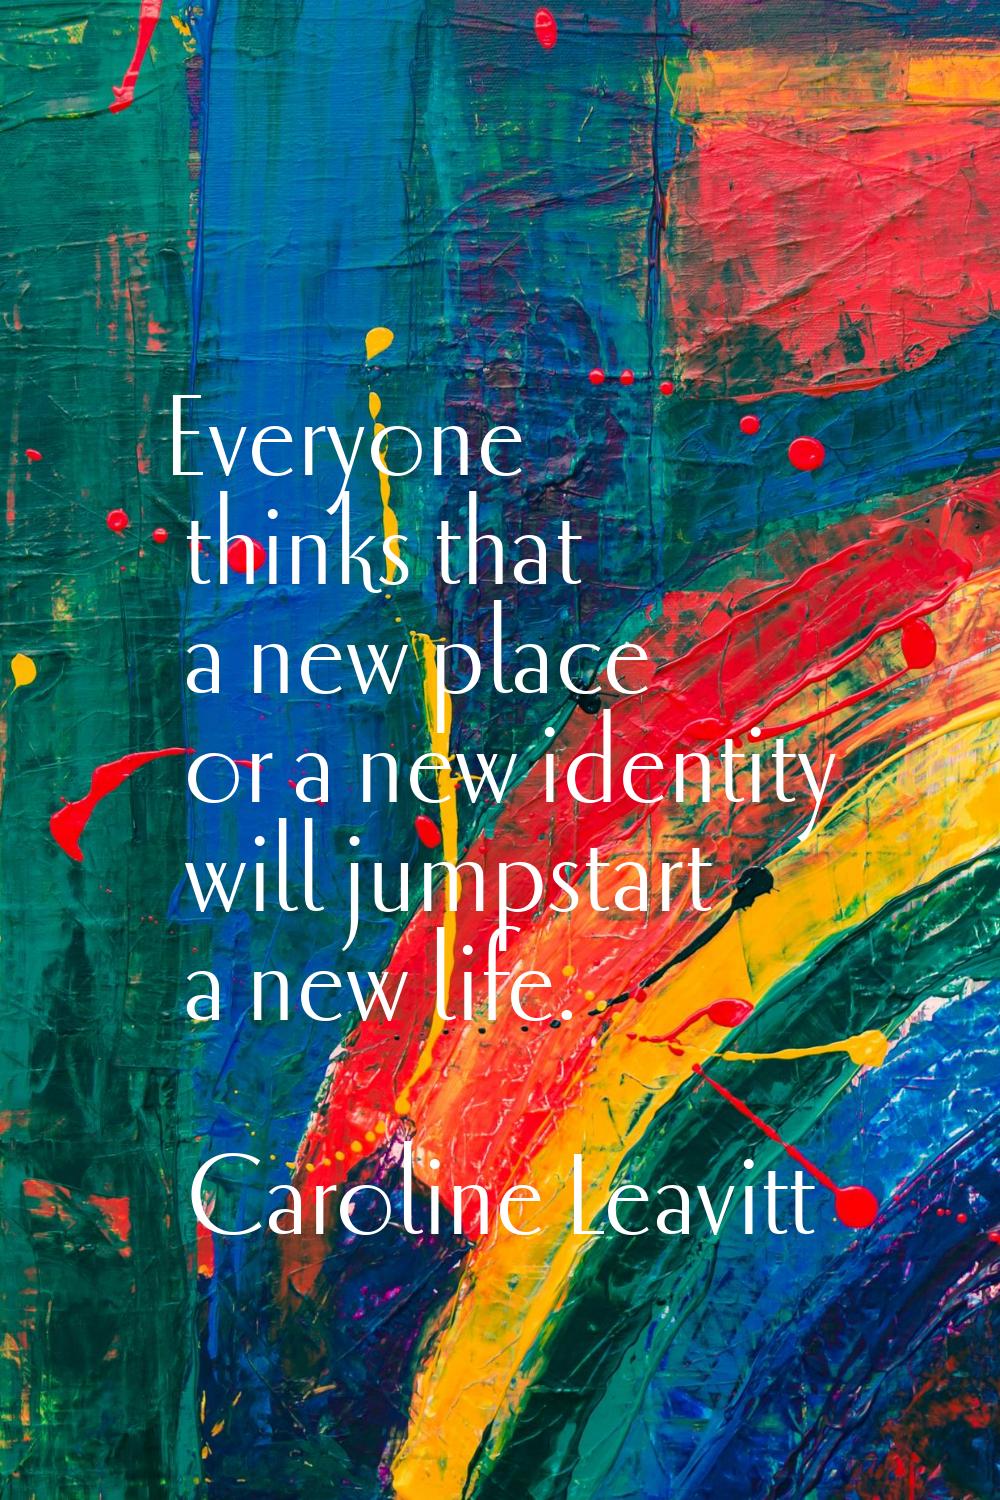 Everyone thinks that a new place or a new identity will jumpstart a new life.